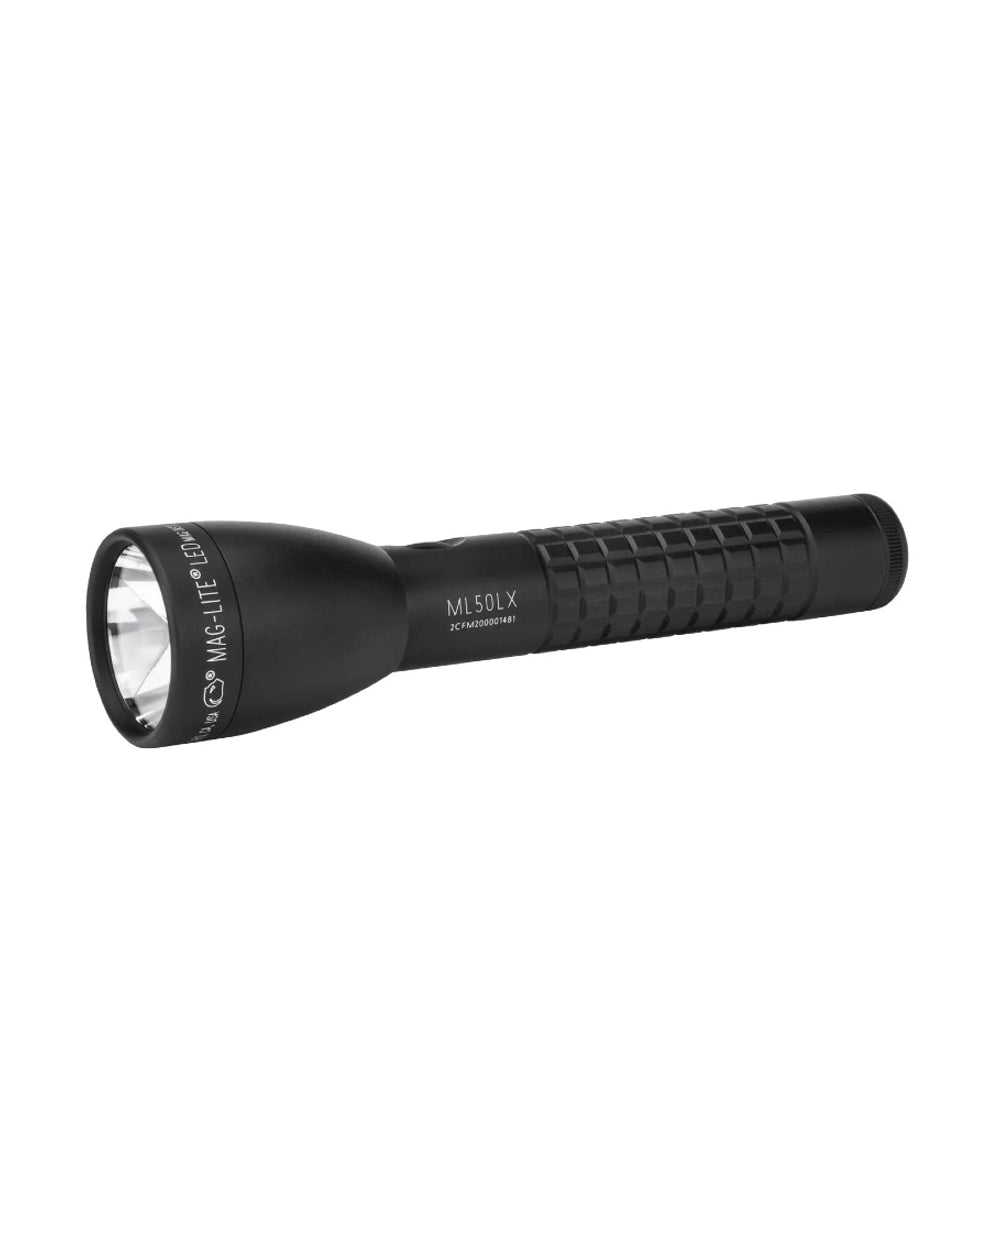 Maglite ML50LX 2 C Cell LED Torch in Stealth Matte Black